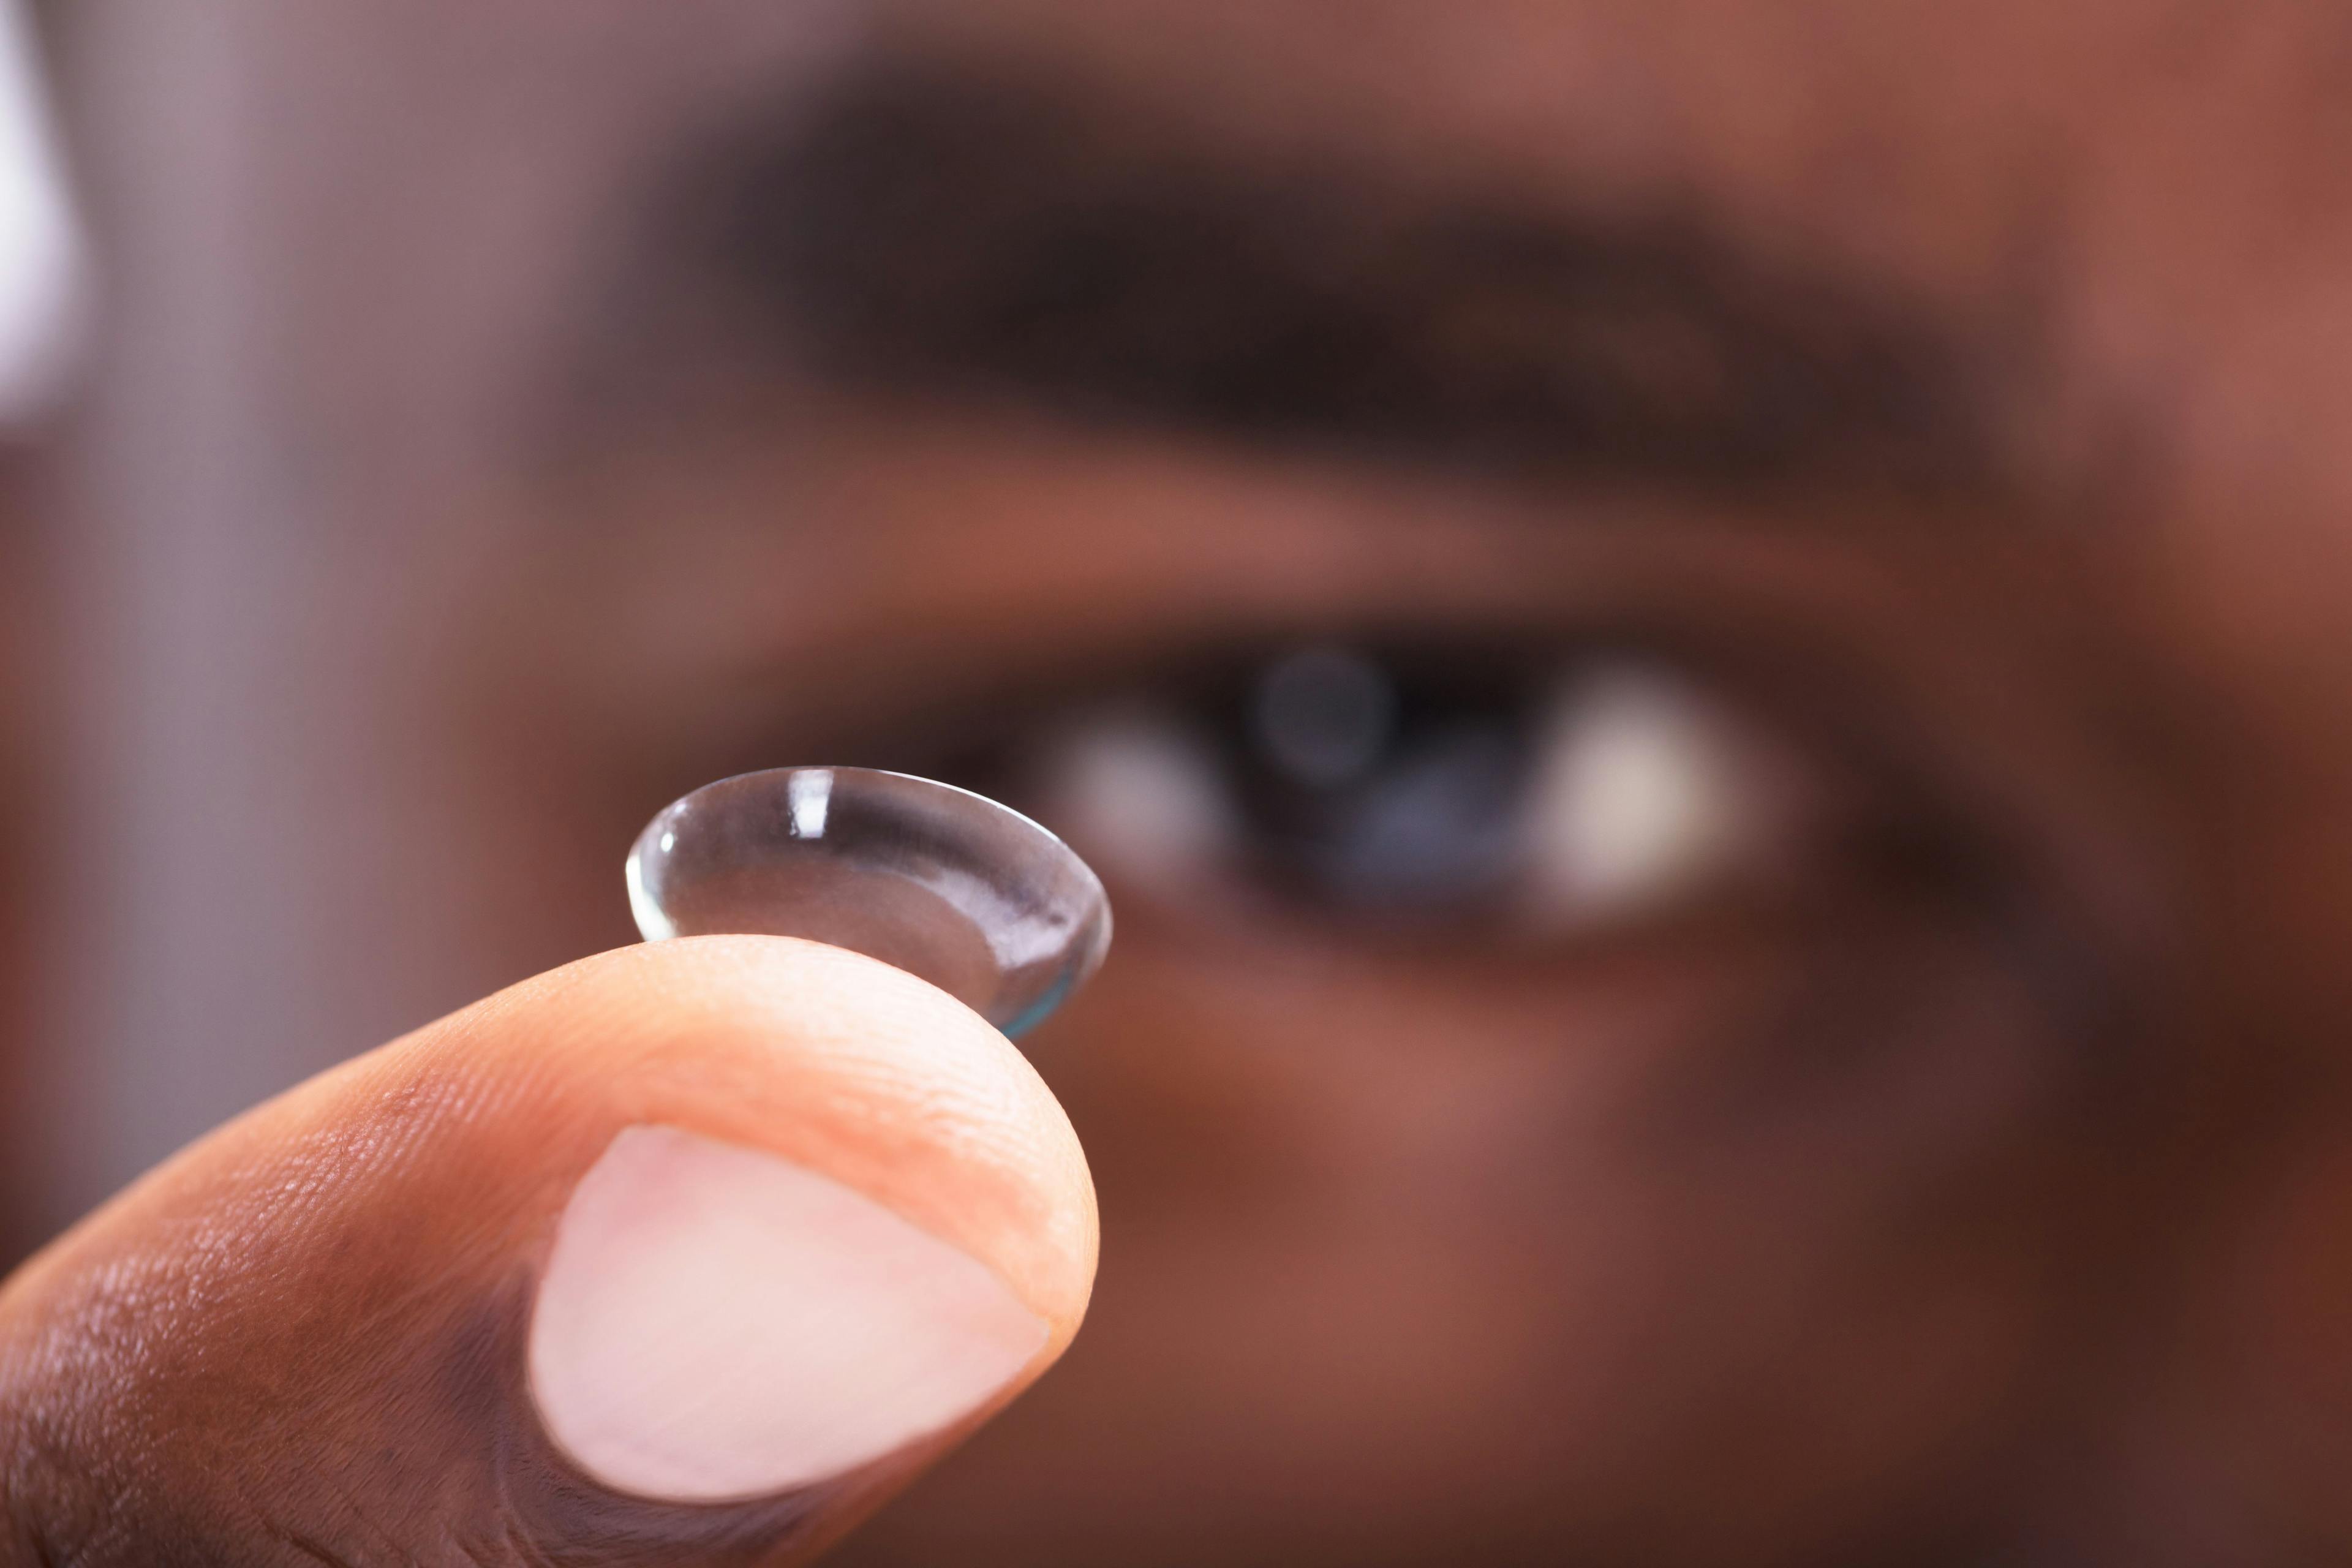 Contact Lens Institute launches contact lens health and safety program 